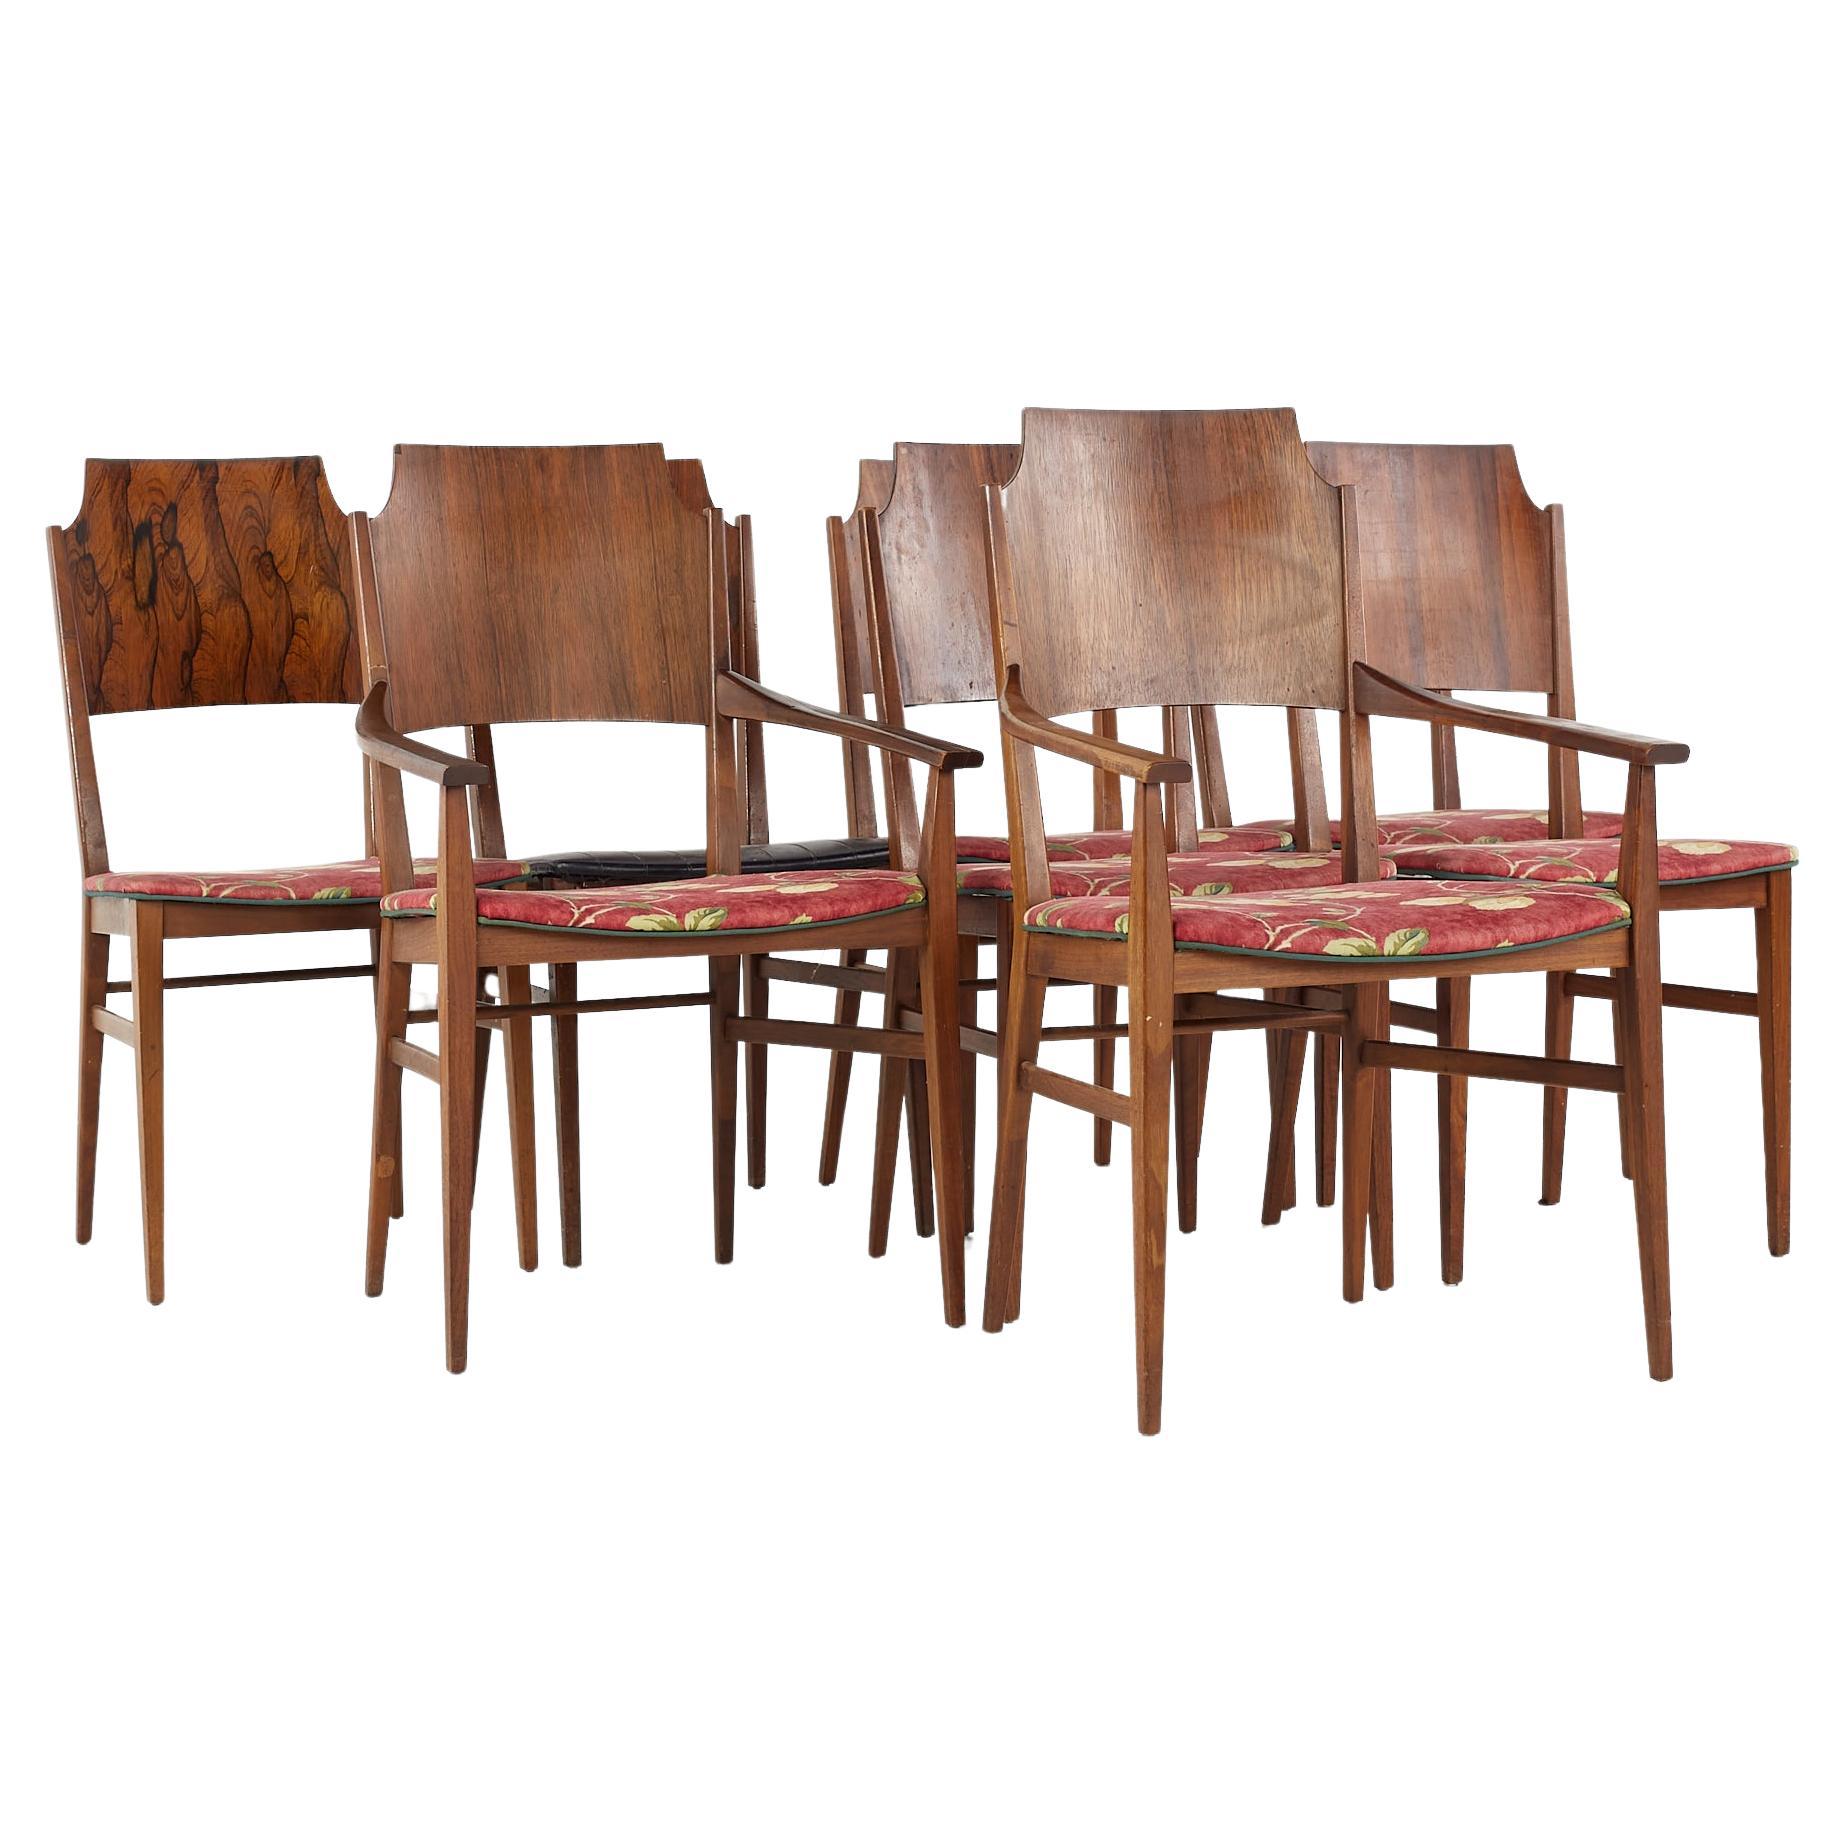 Paul McCobb for Lane Delineator Mid Century Rosewood Dining Chairs - Set of 8 For Sale